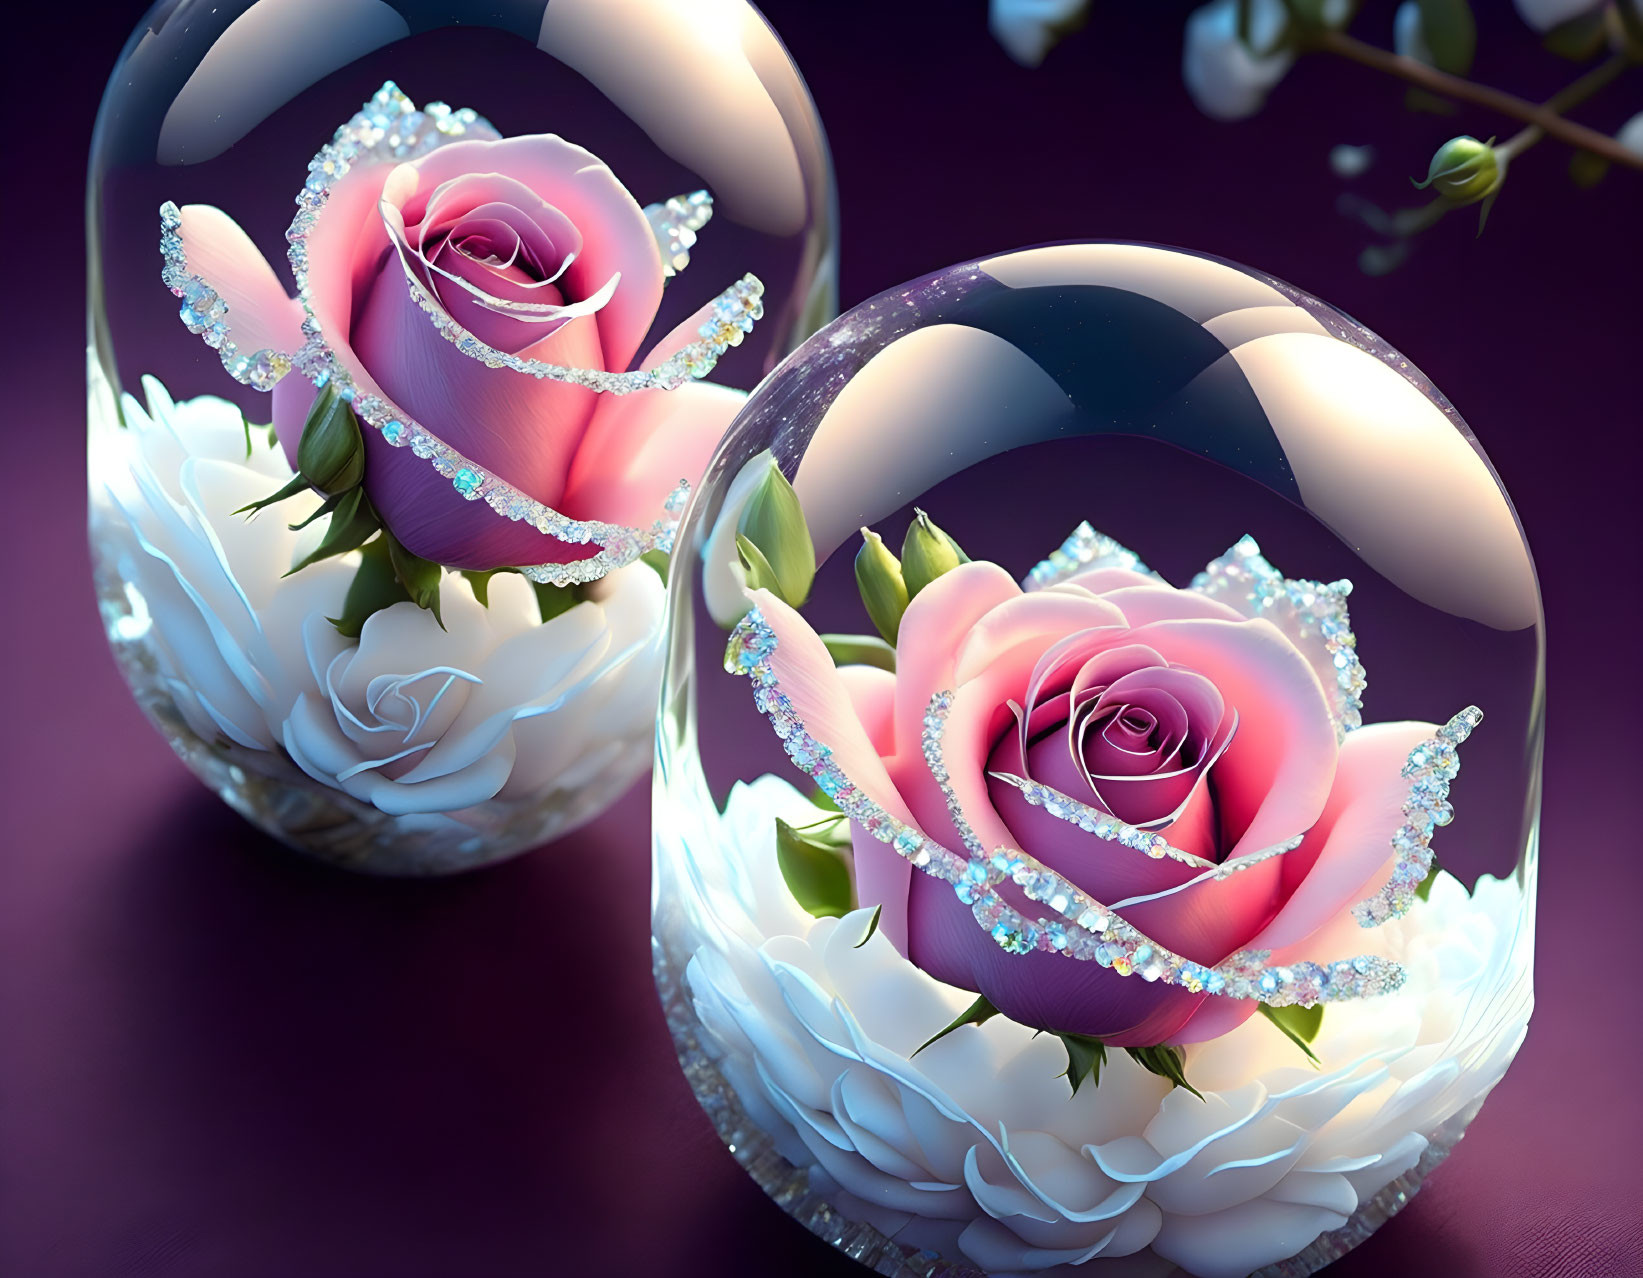 Shimmering crystal spheres with pink roses, white petals, and jewels on purple background